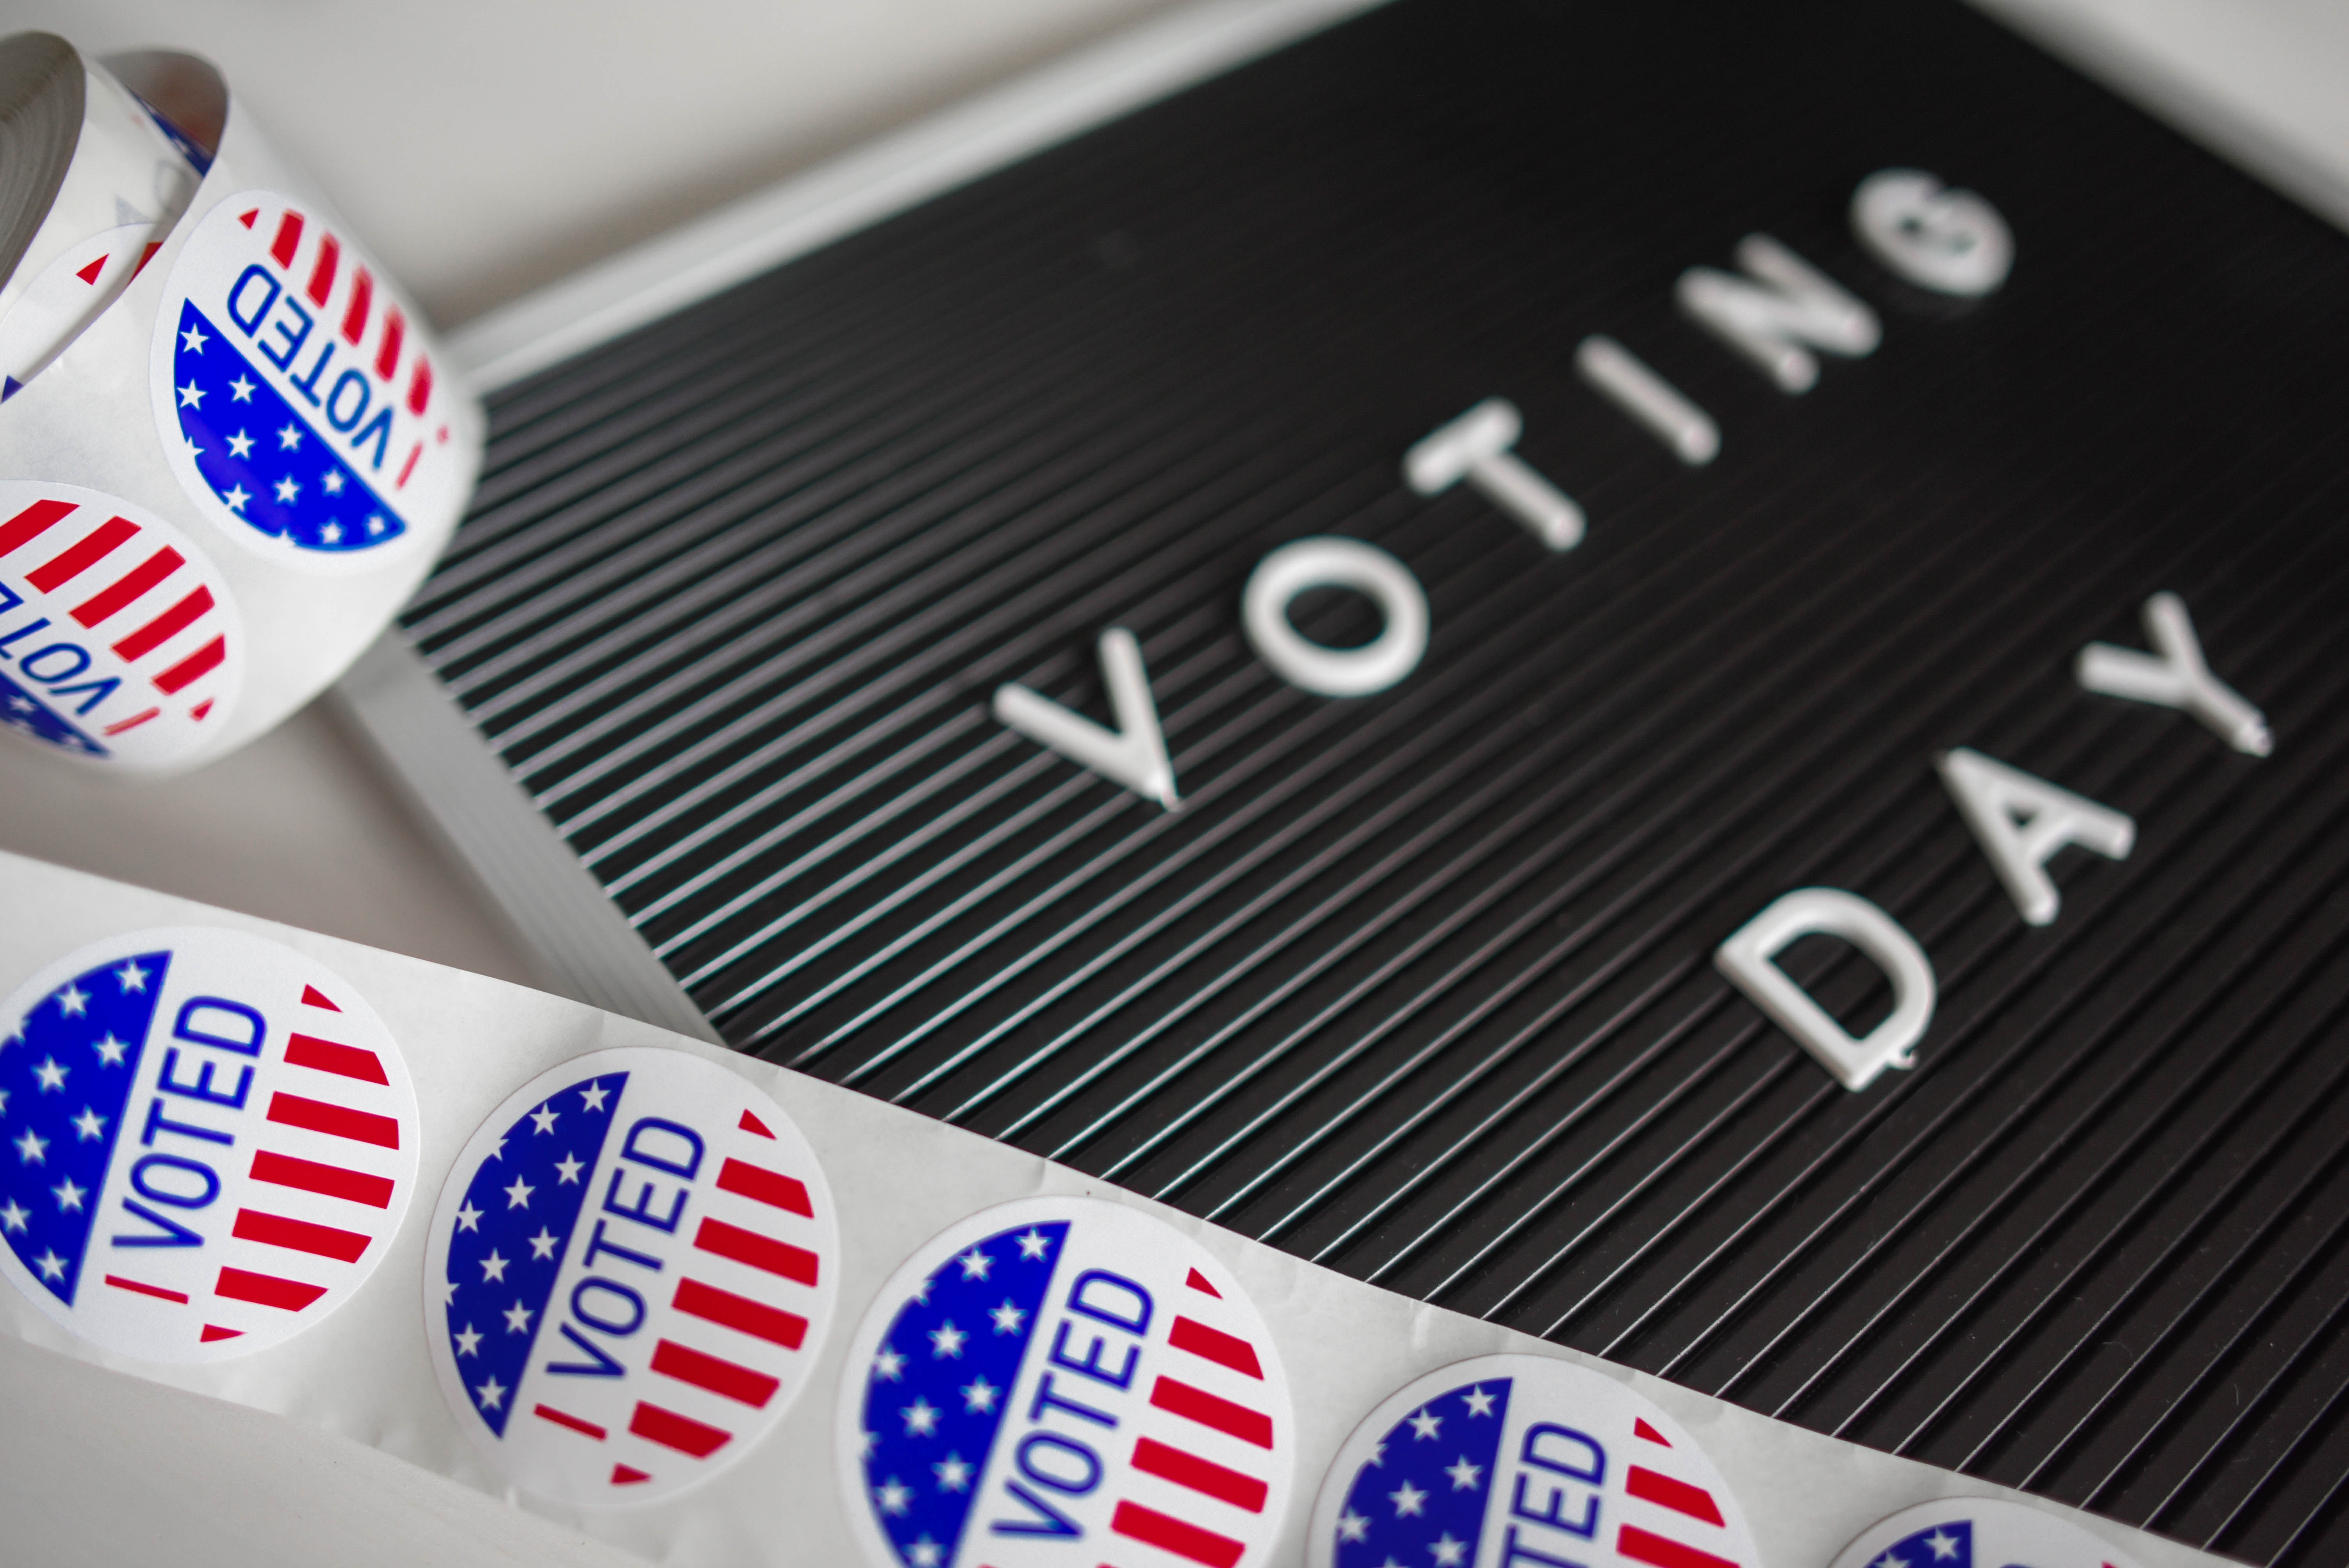 Voting Day letterboard and vote stickers